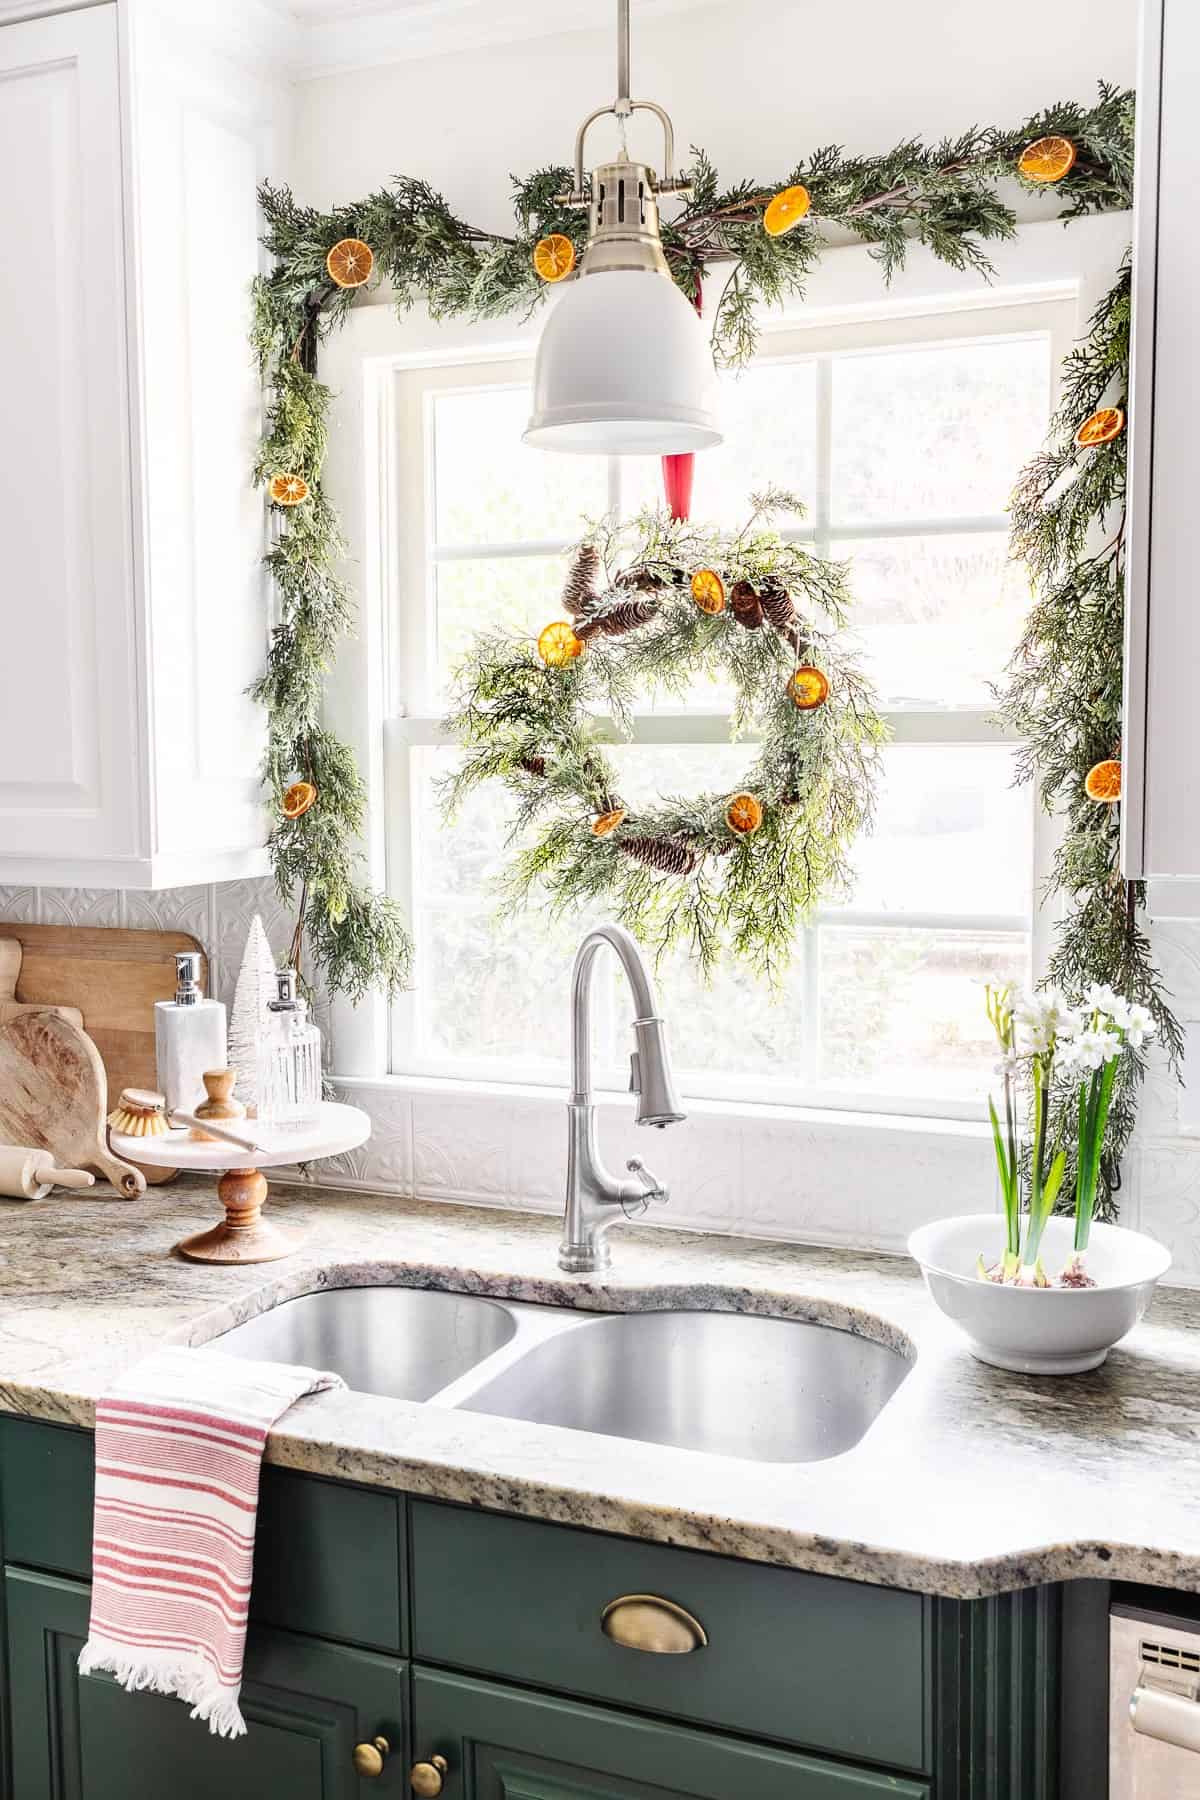 Christmas decorated kitchen window with garland and Christmas towels.